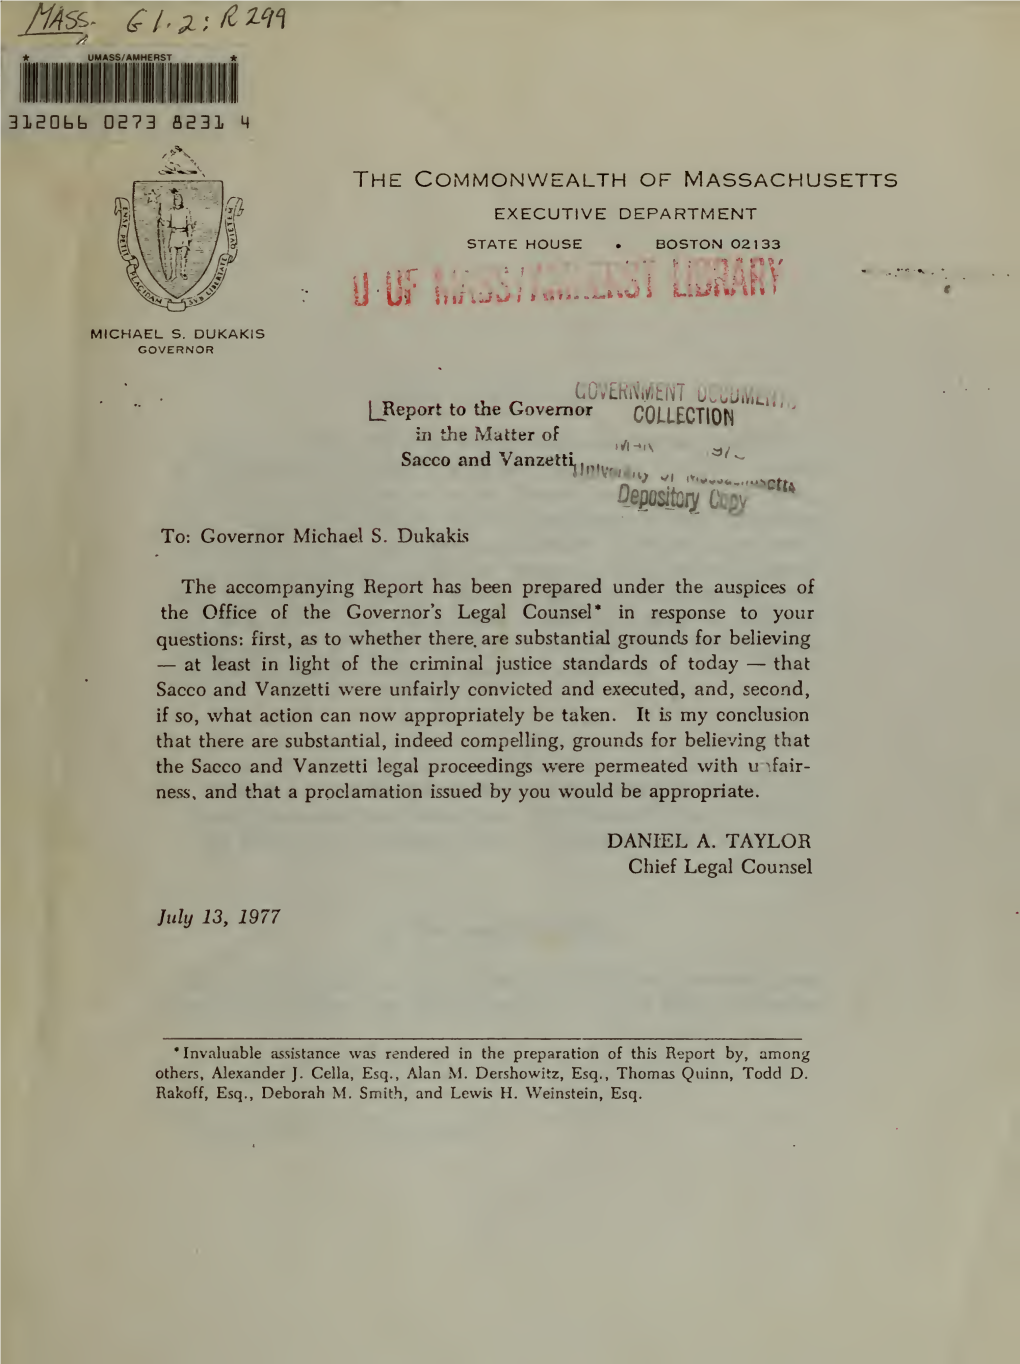 Report to the Governor in the Matter of Sacco and Vanzetti